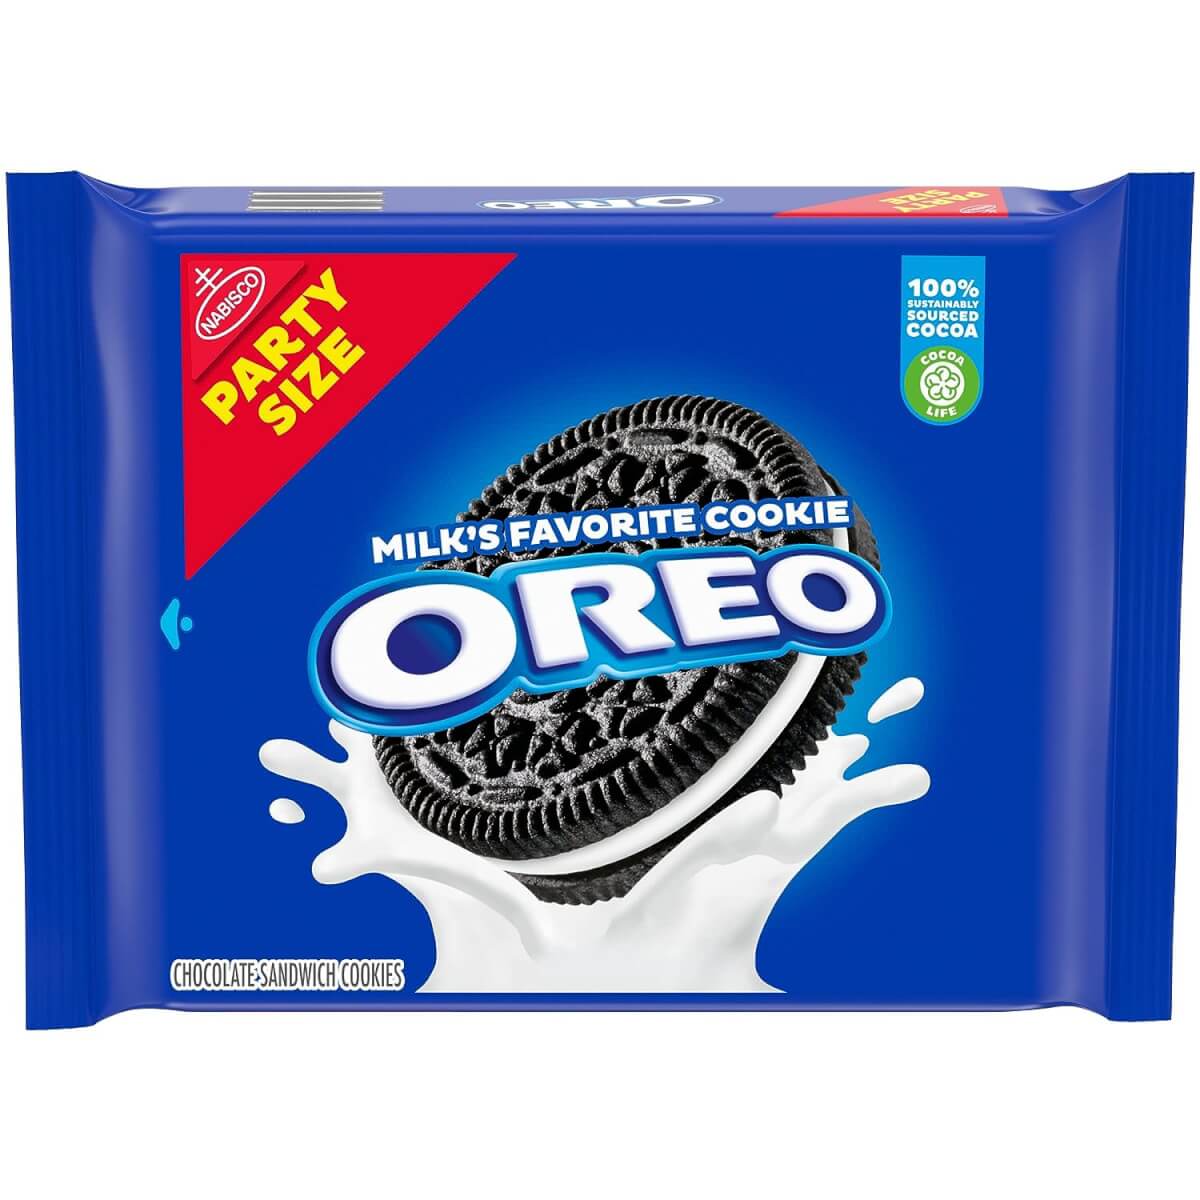 The original Oreo cookie - Party Size